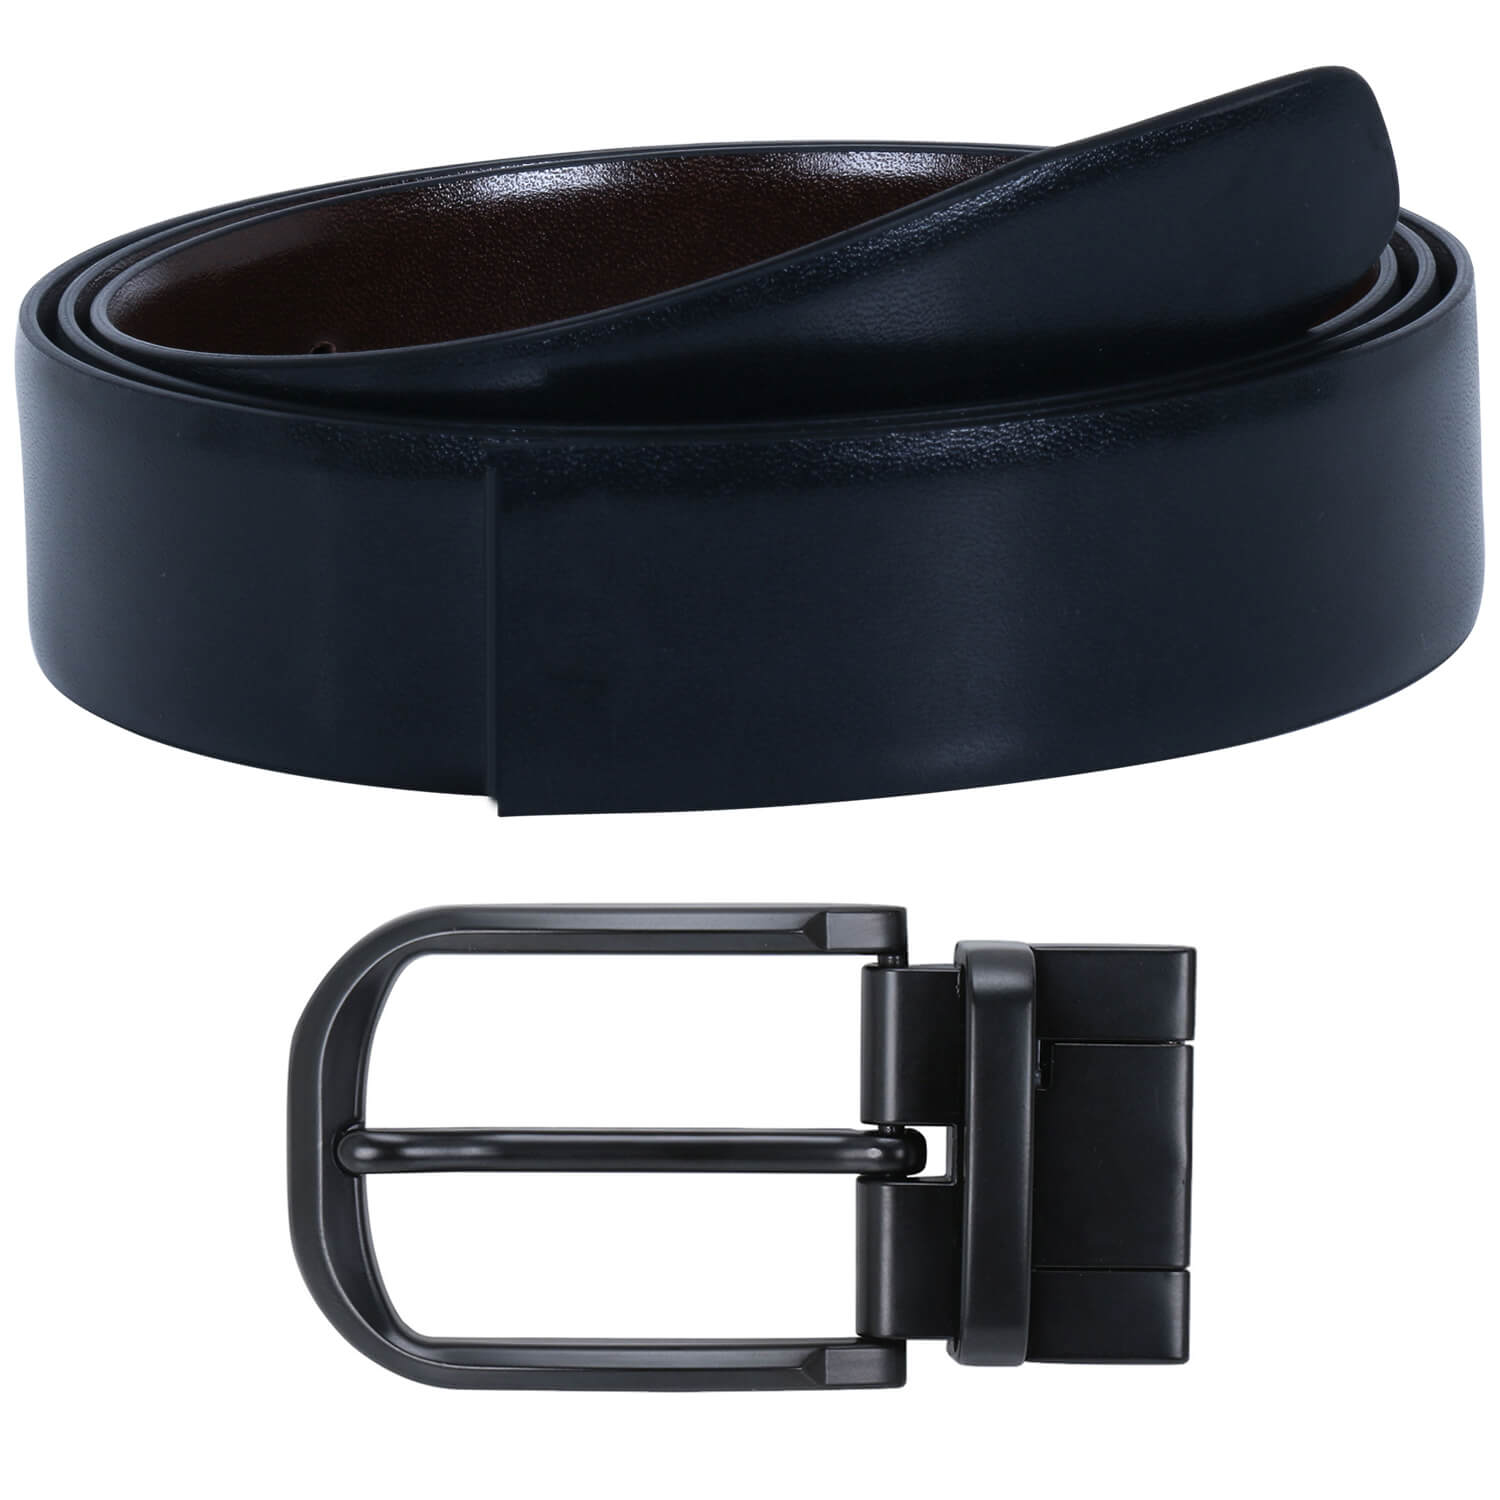 CREATURE Reversible Pu-Leather Formal Belt For Men(Color-Black/Brown, BL-01, 46 inches length